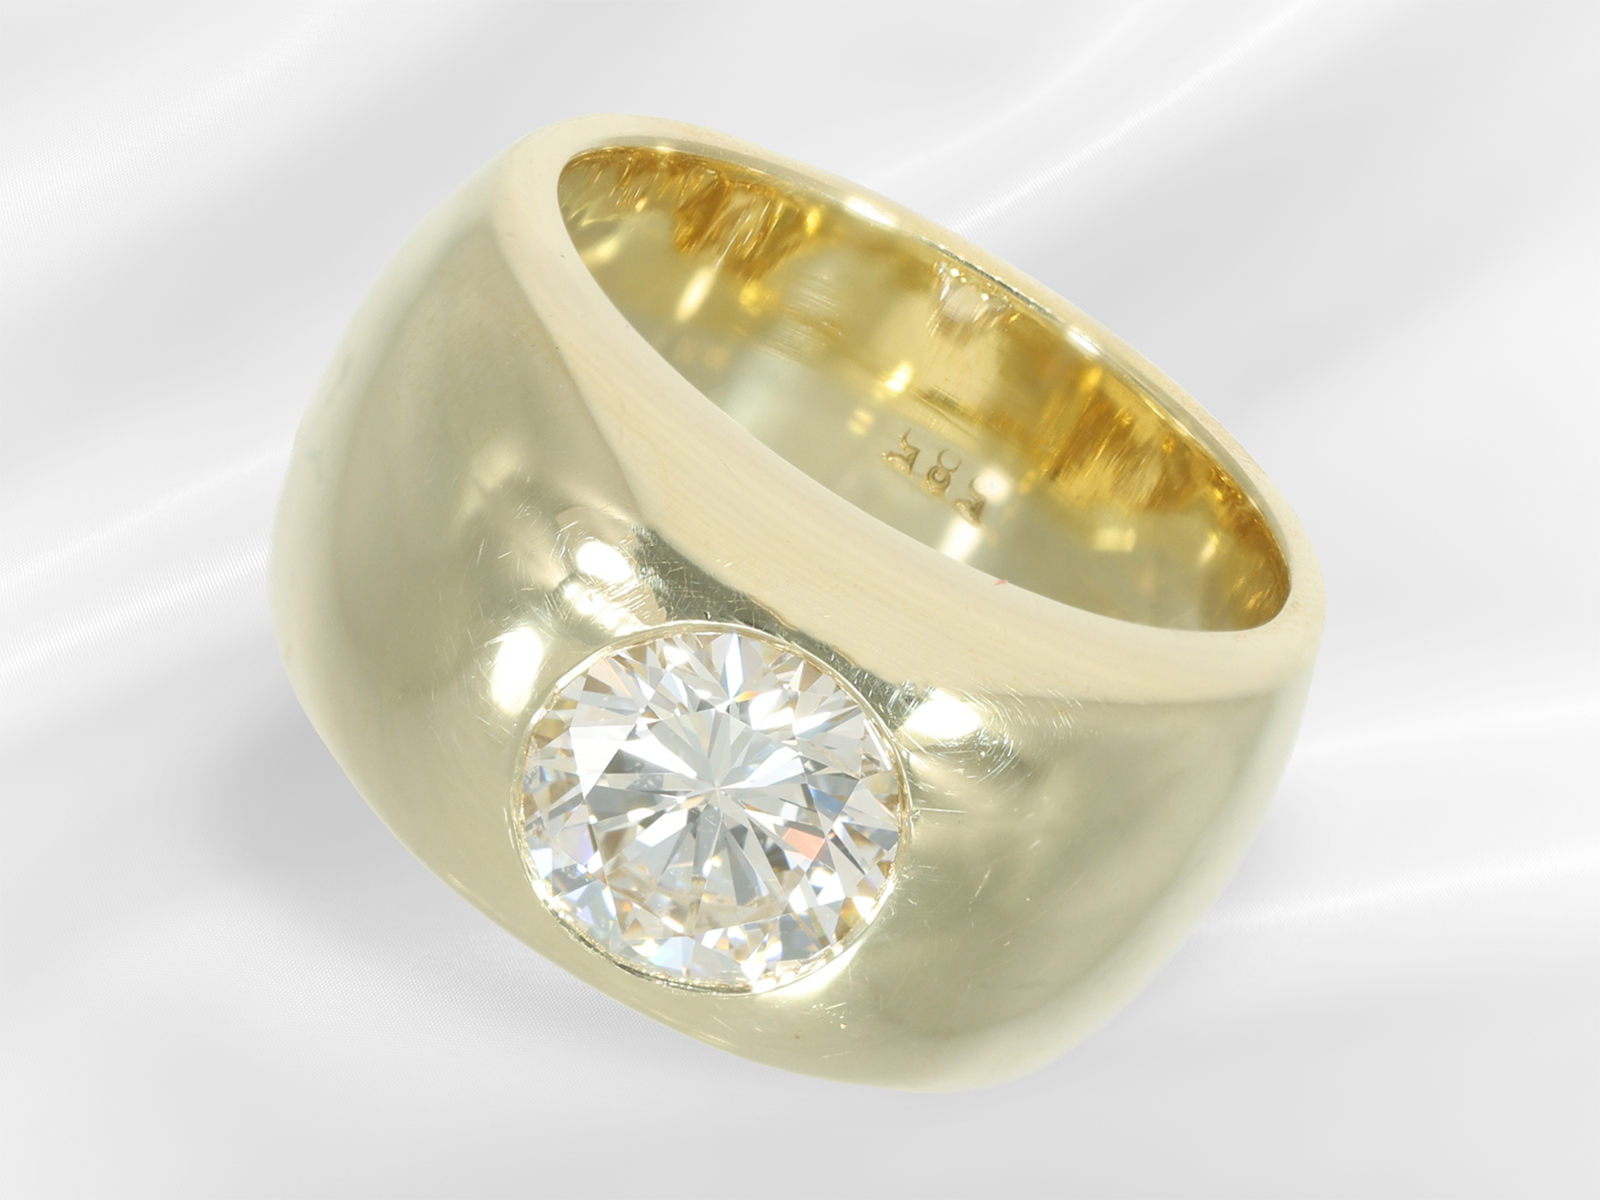 Ring: very high-quality brilliant-cut diamond solitaire ring of the finest quality, approx. 1.5ct